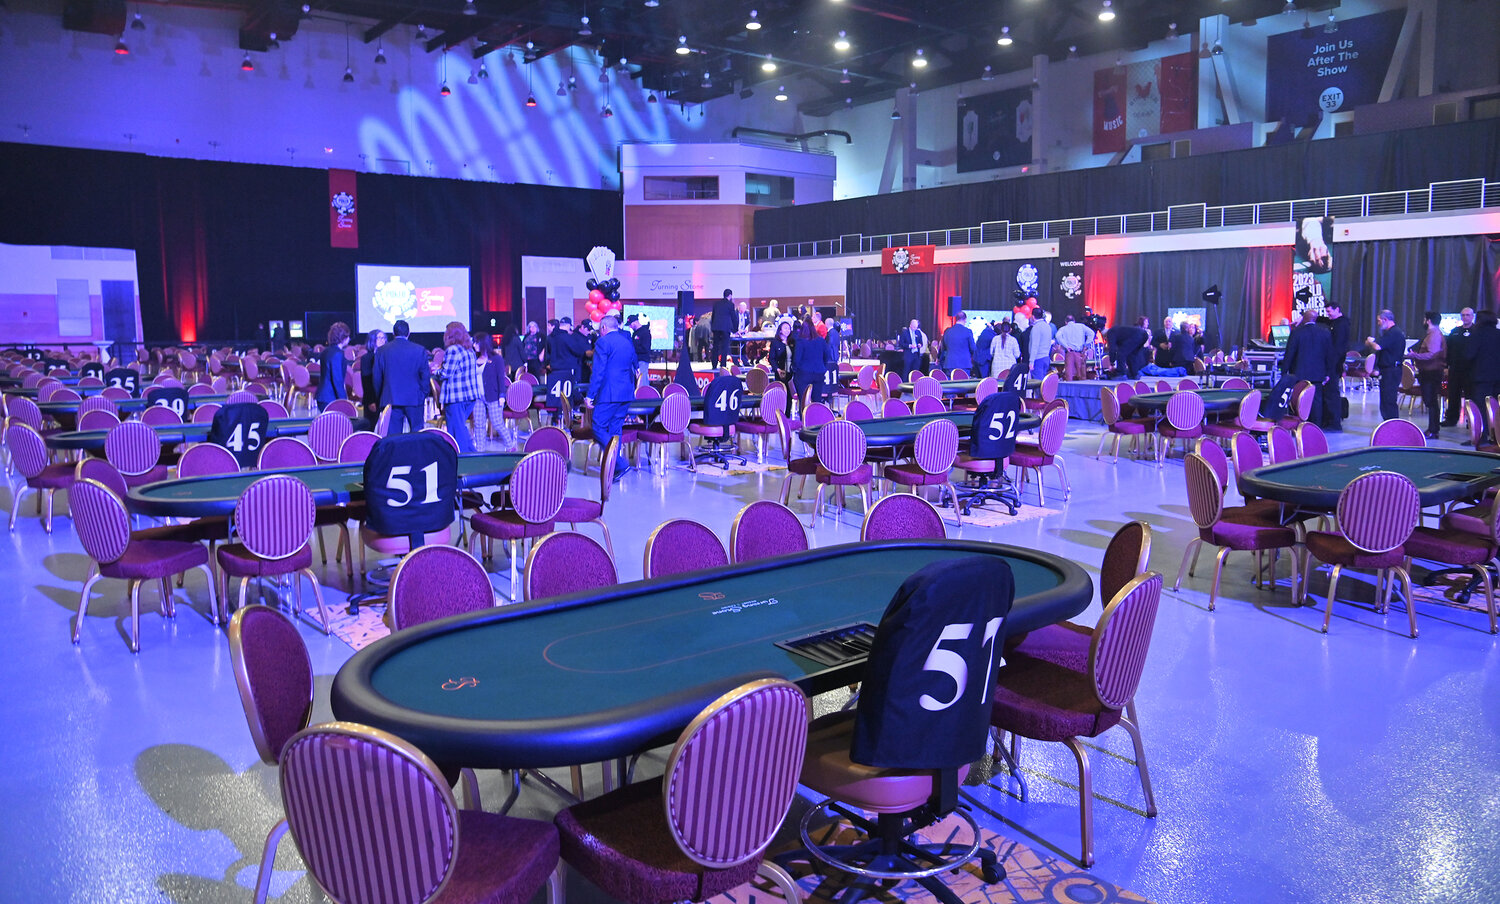 POKER TABLES — The event center at Turning Stone Resort and Casino is full of poker tables. Twenty more tables were added to the World Series of Poker circuit event this year.